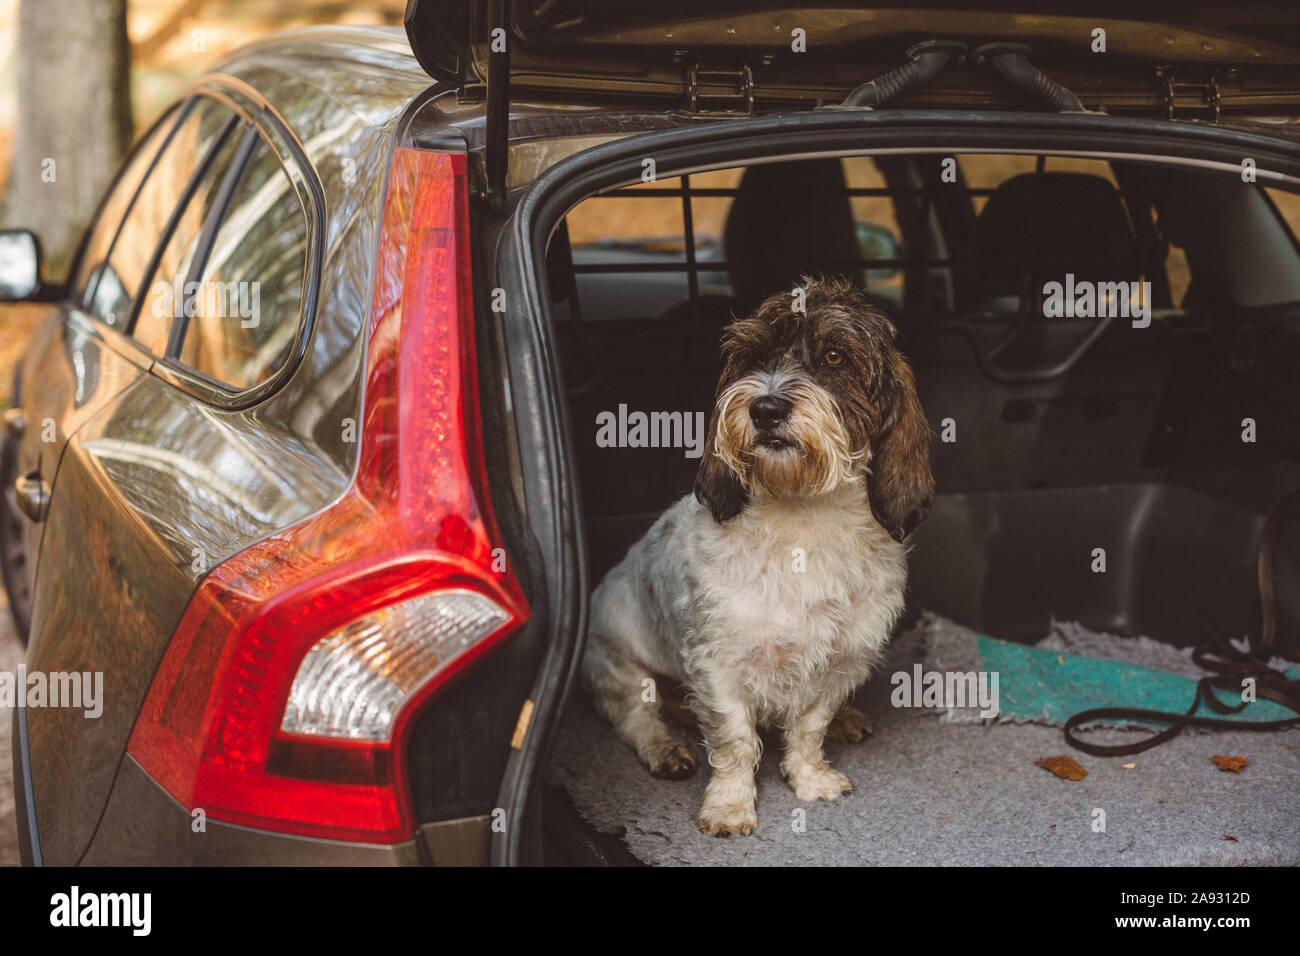 Dog sitting in car boot Banque D'Images